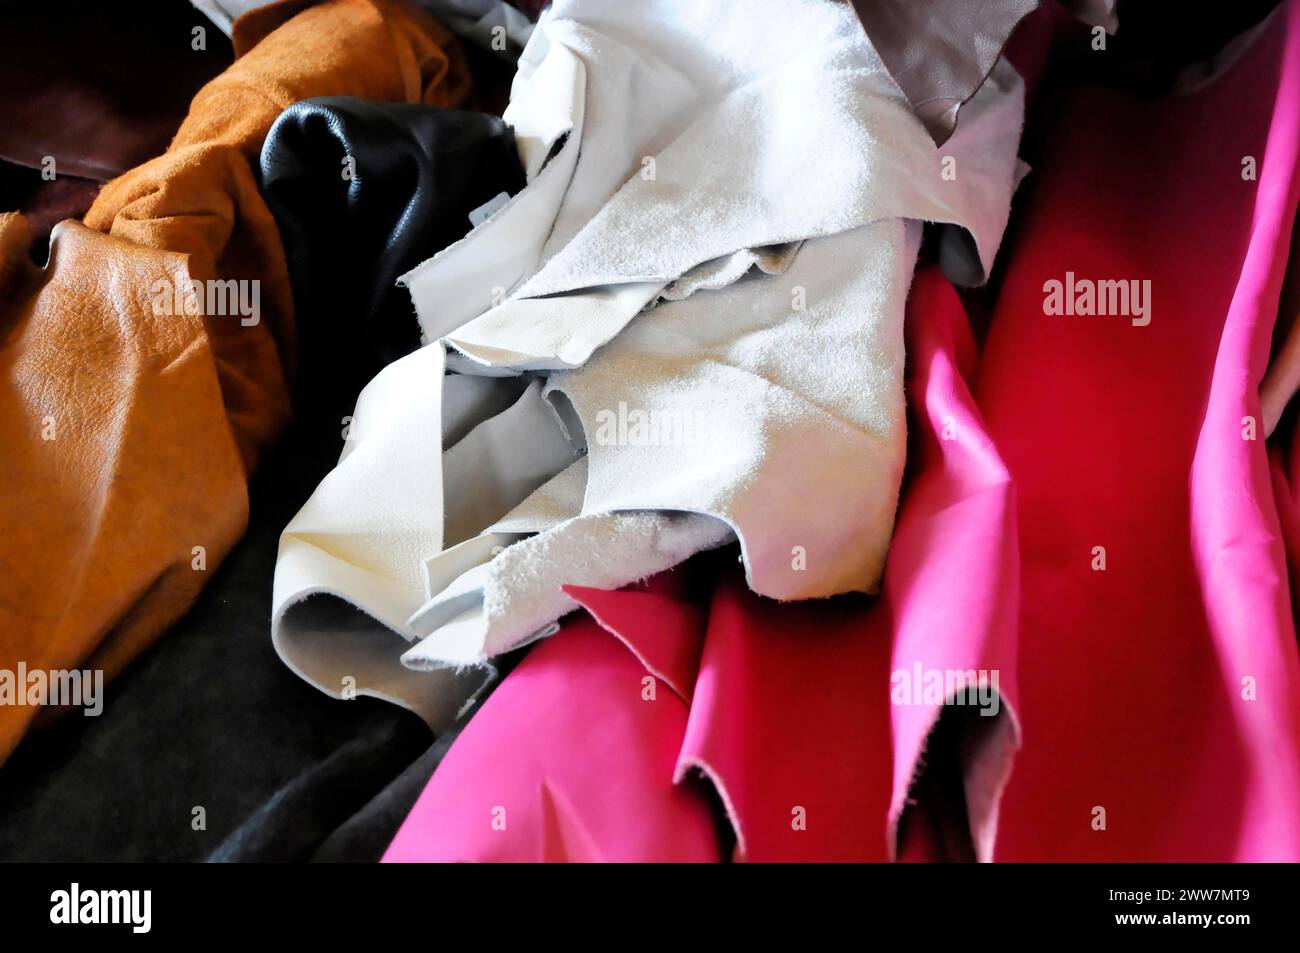 RETRO CLASSICS 2010, Stuttgart Messe, pile of colourful leather and fabric pieces with different textures layered on top of each other, Stuttgart Stock Photo